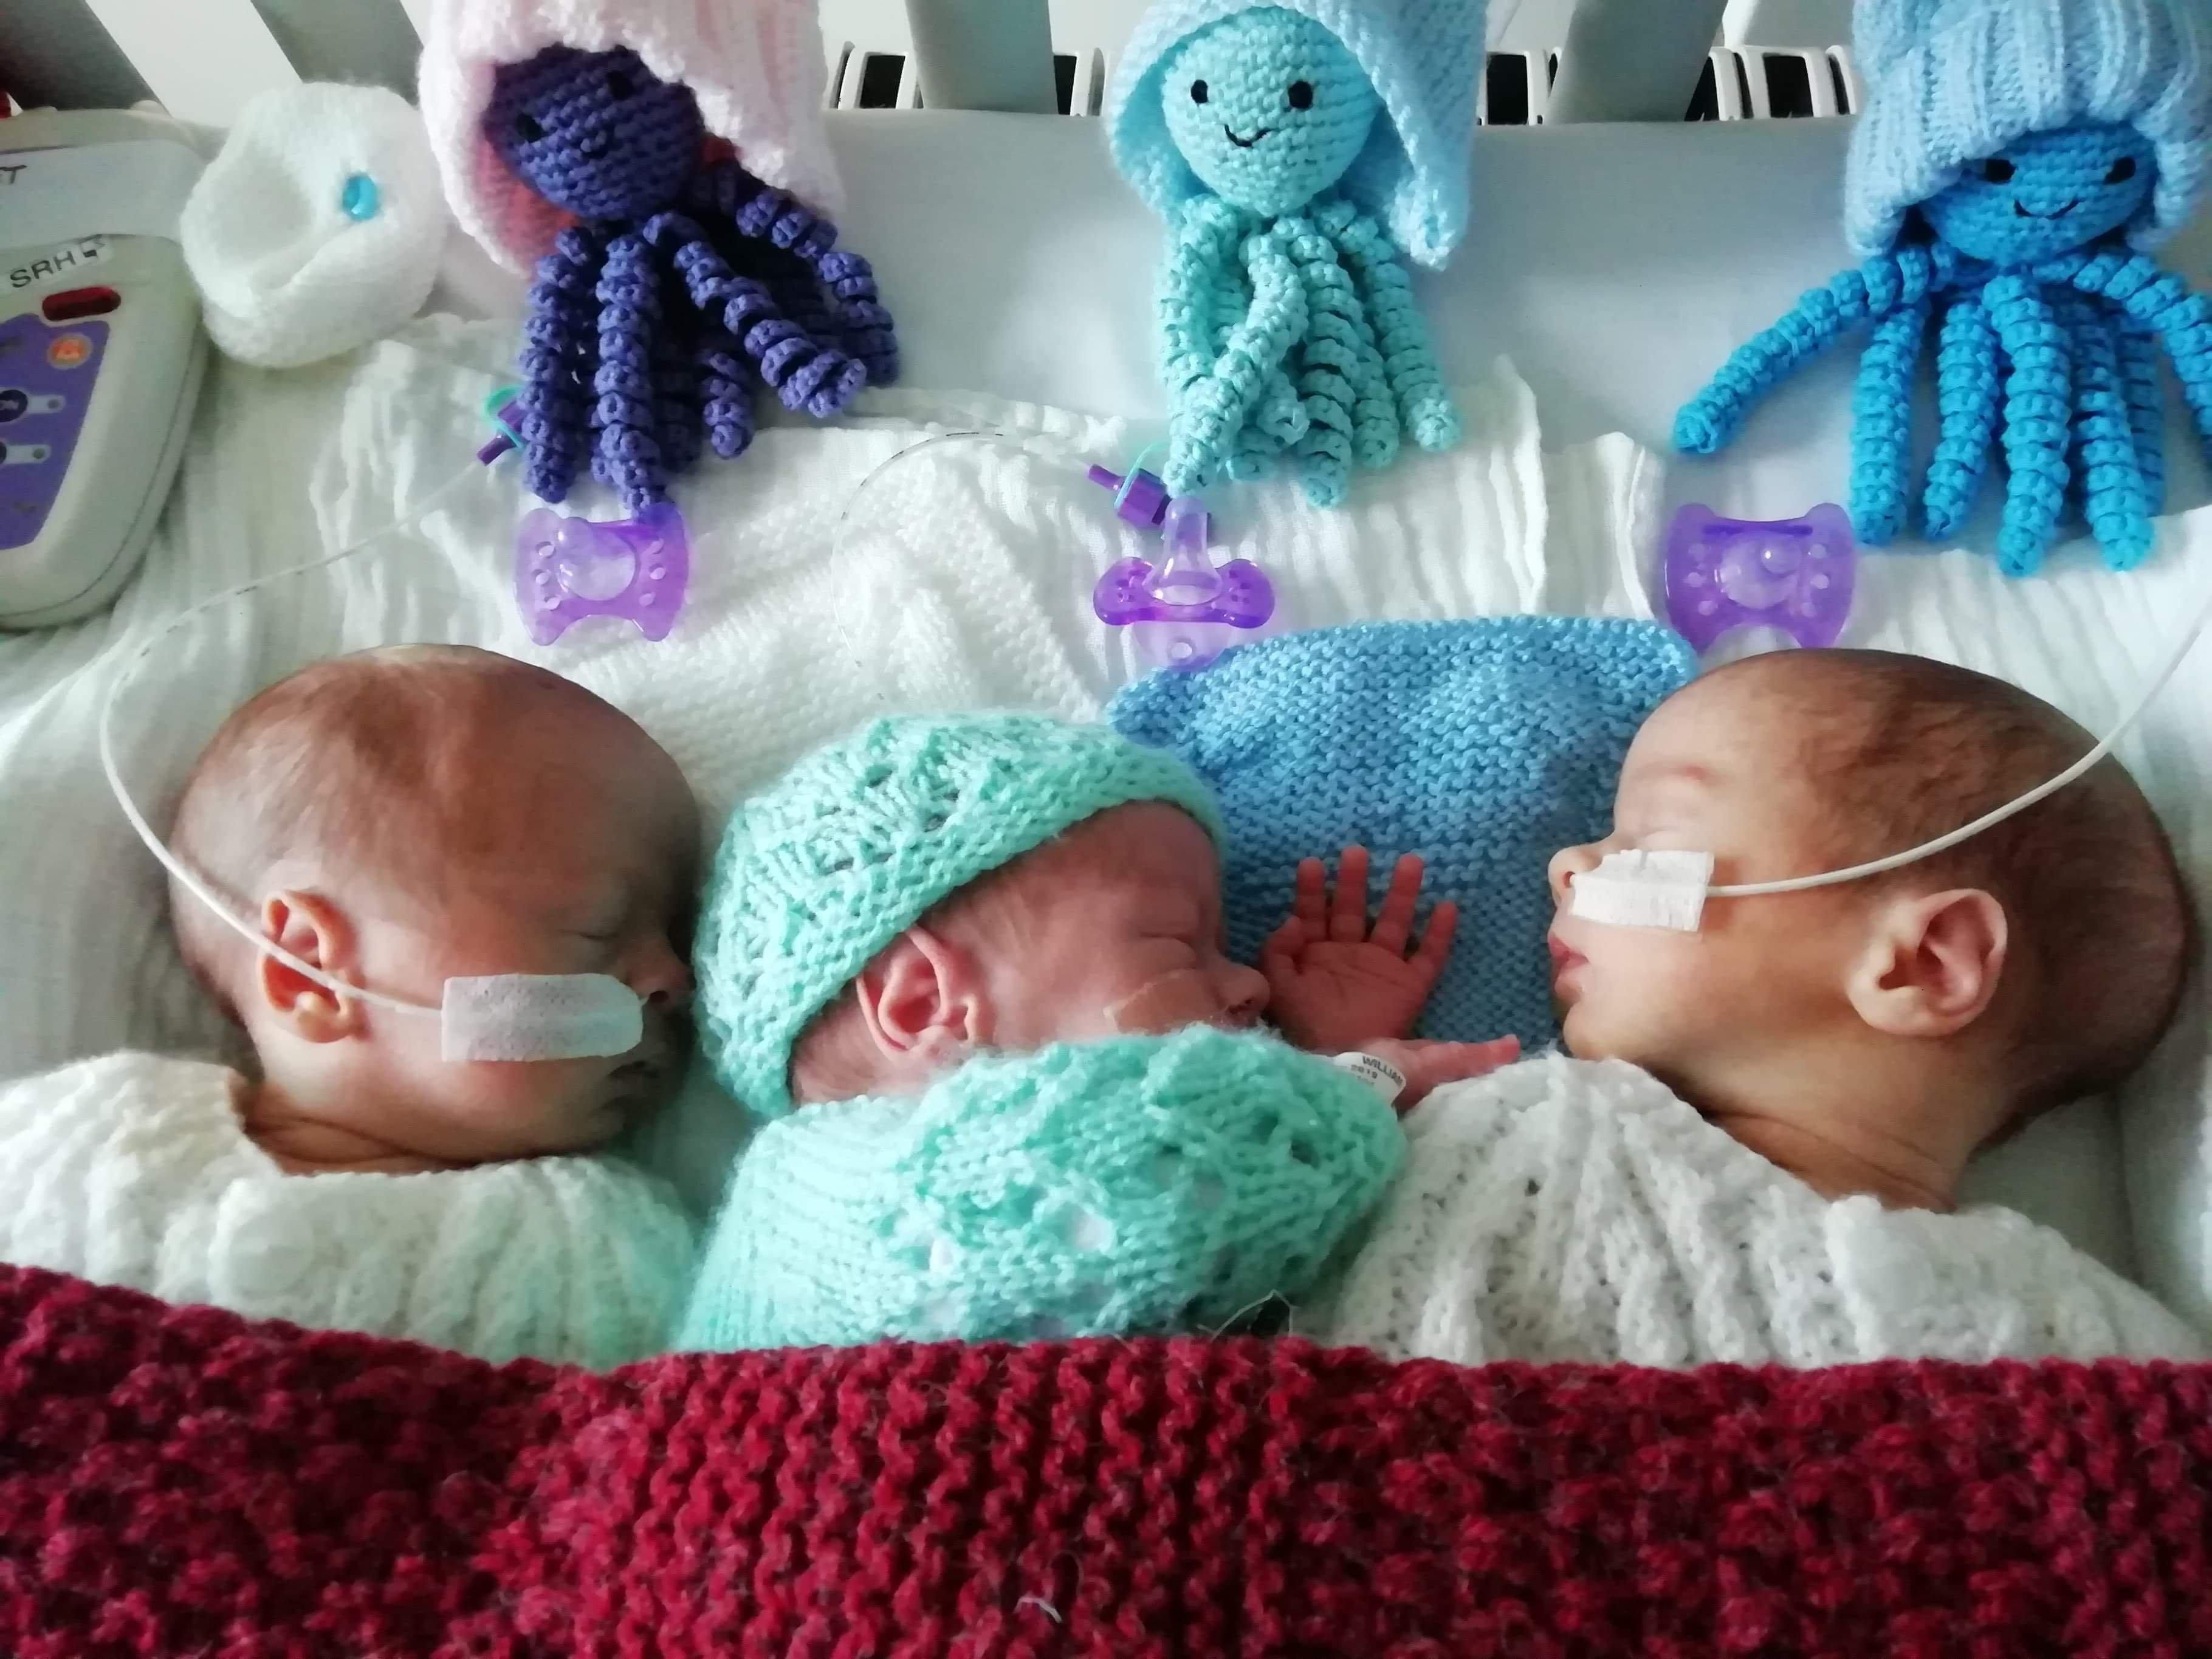 Cheryl Carter and Chris Pegrum from Yapton have triplets: Violet, Frank, and William